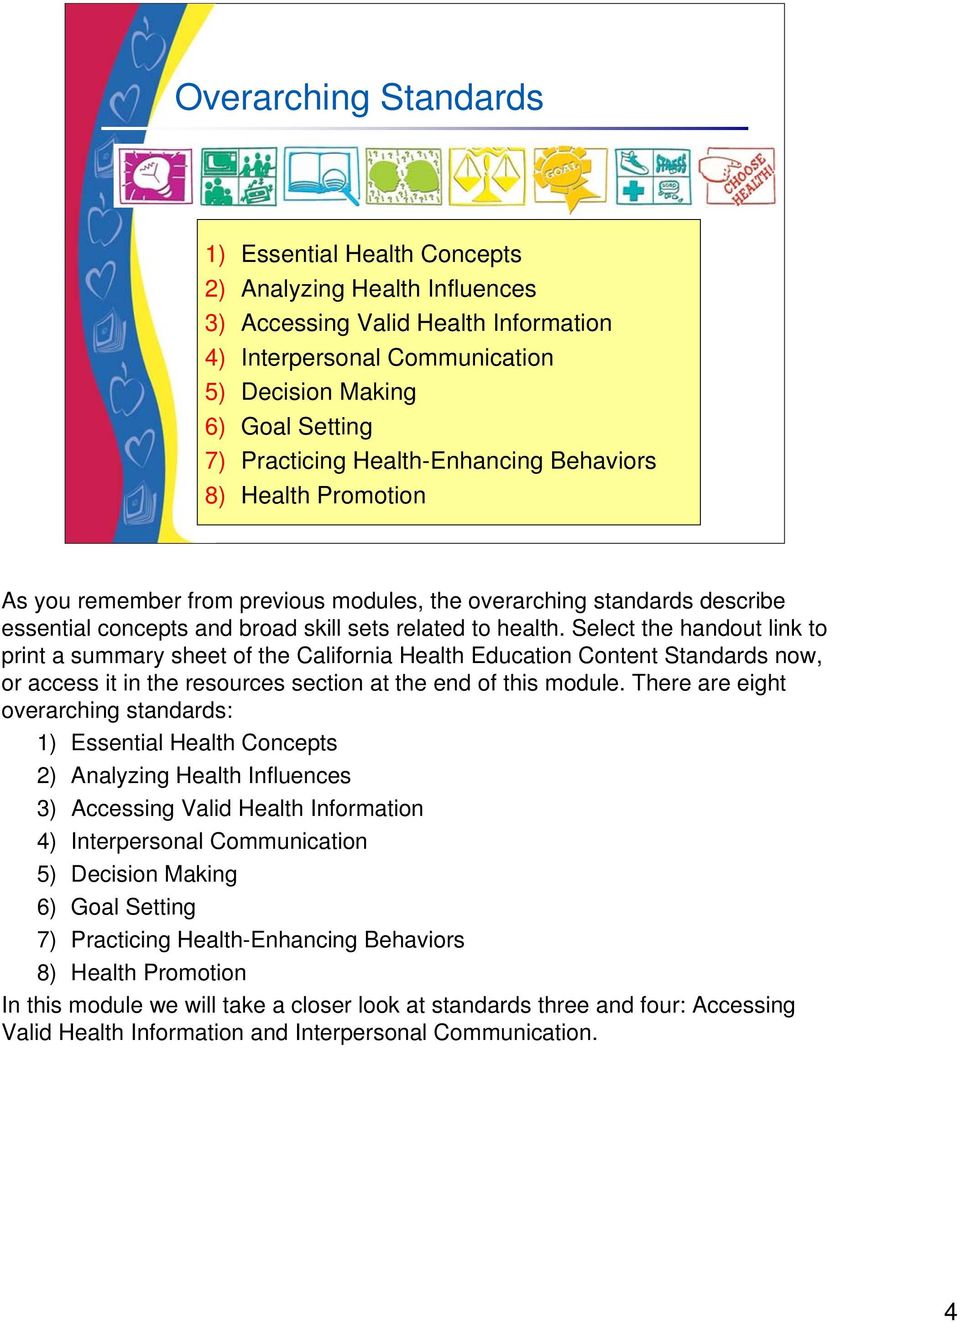 Select the handout link to print a summary sheet of the California Health Education Content Standards now, or access it in the resources section at the end of this module.